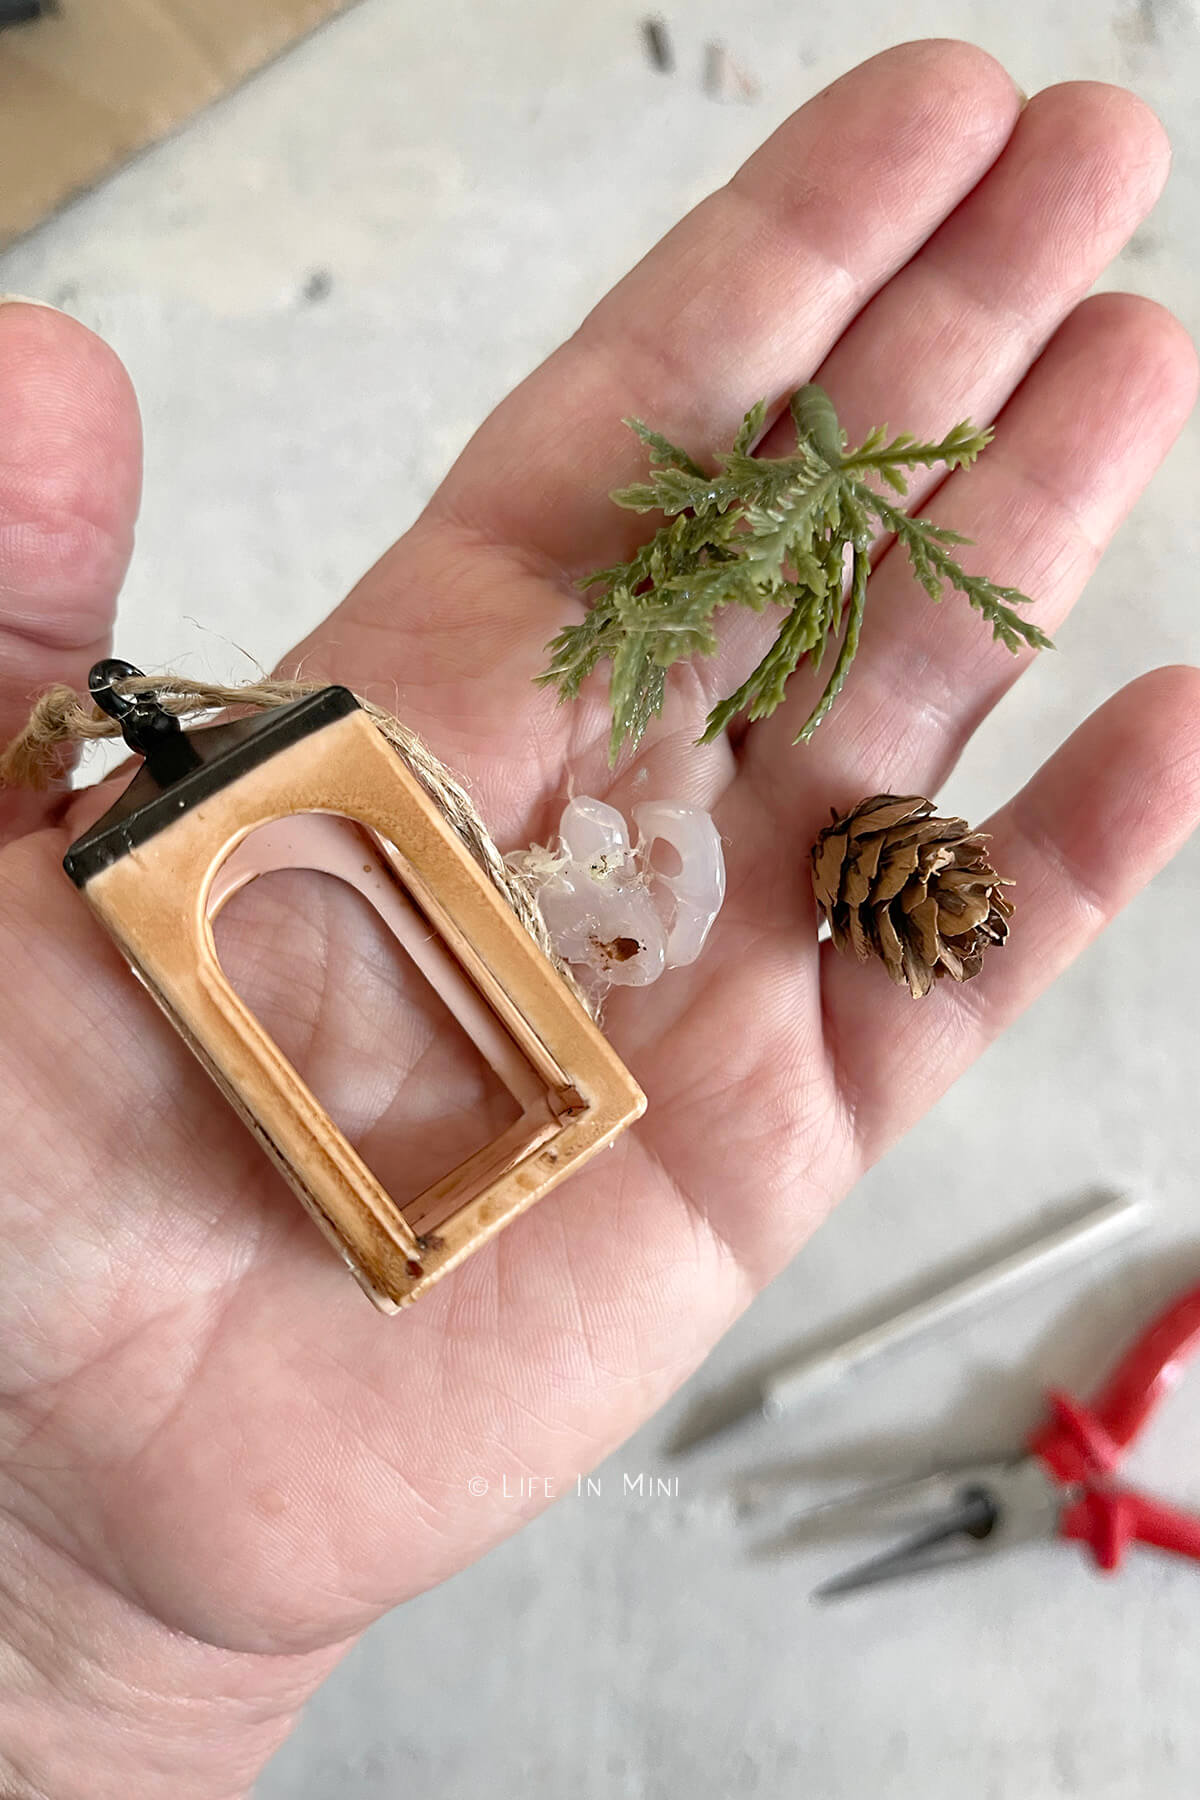 A hand holding a miniature lantern ornament with the greenery, pinecone and excess glue removed